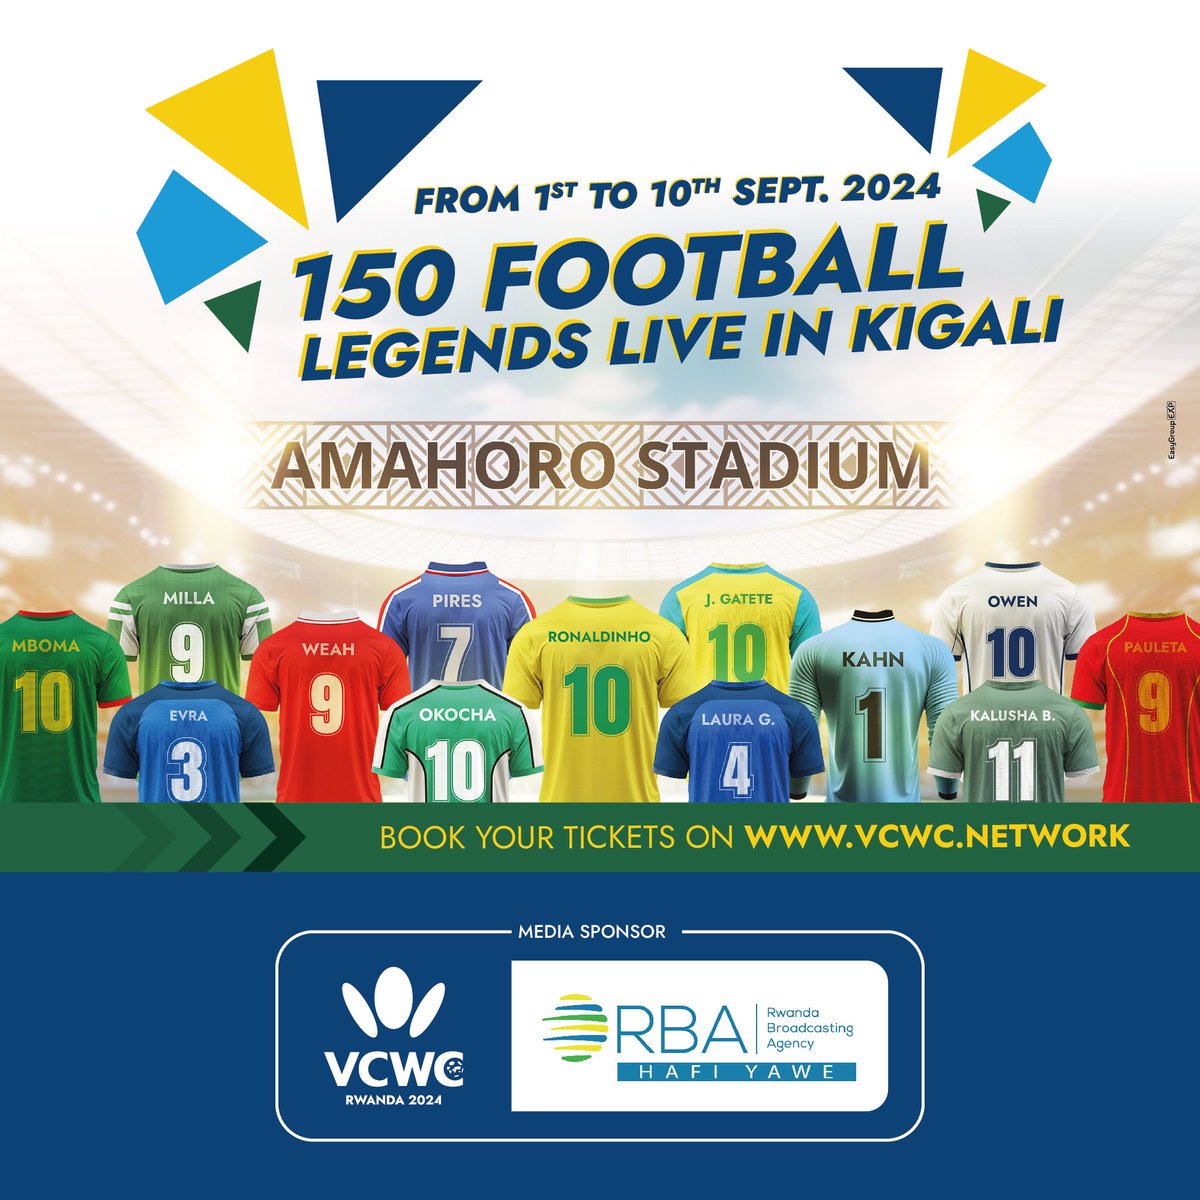 Football Fans, WHERE YOU AT? #VCWC2024

We are thrilled to be the Media Sponsor of the Veteran Club World Championship!

100 DAYS TO GO! Get ready for epic matches, free ticket giveaways, and discounts!

Stay tuned for more exciting updates!  
➡️  @VCWC2024